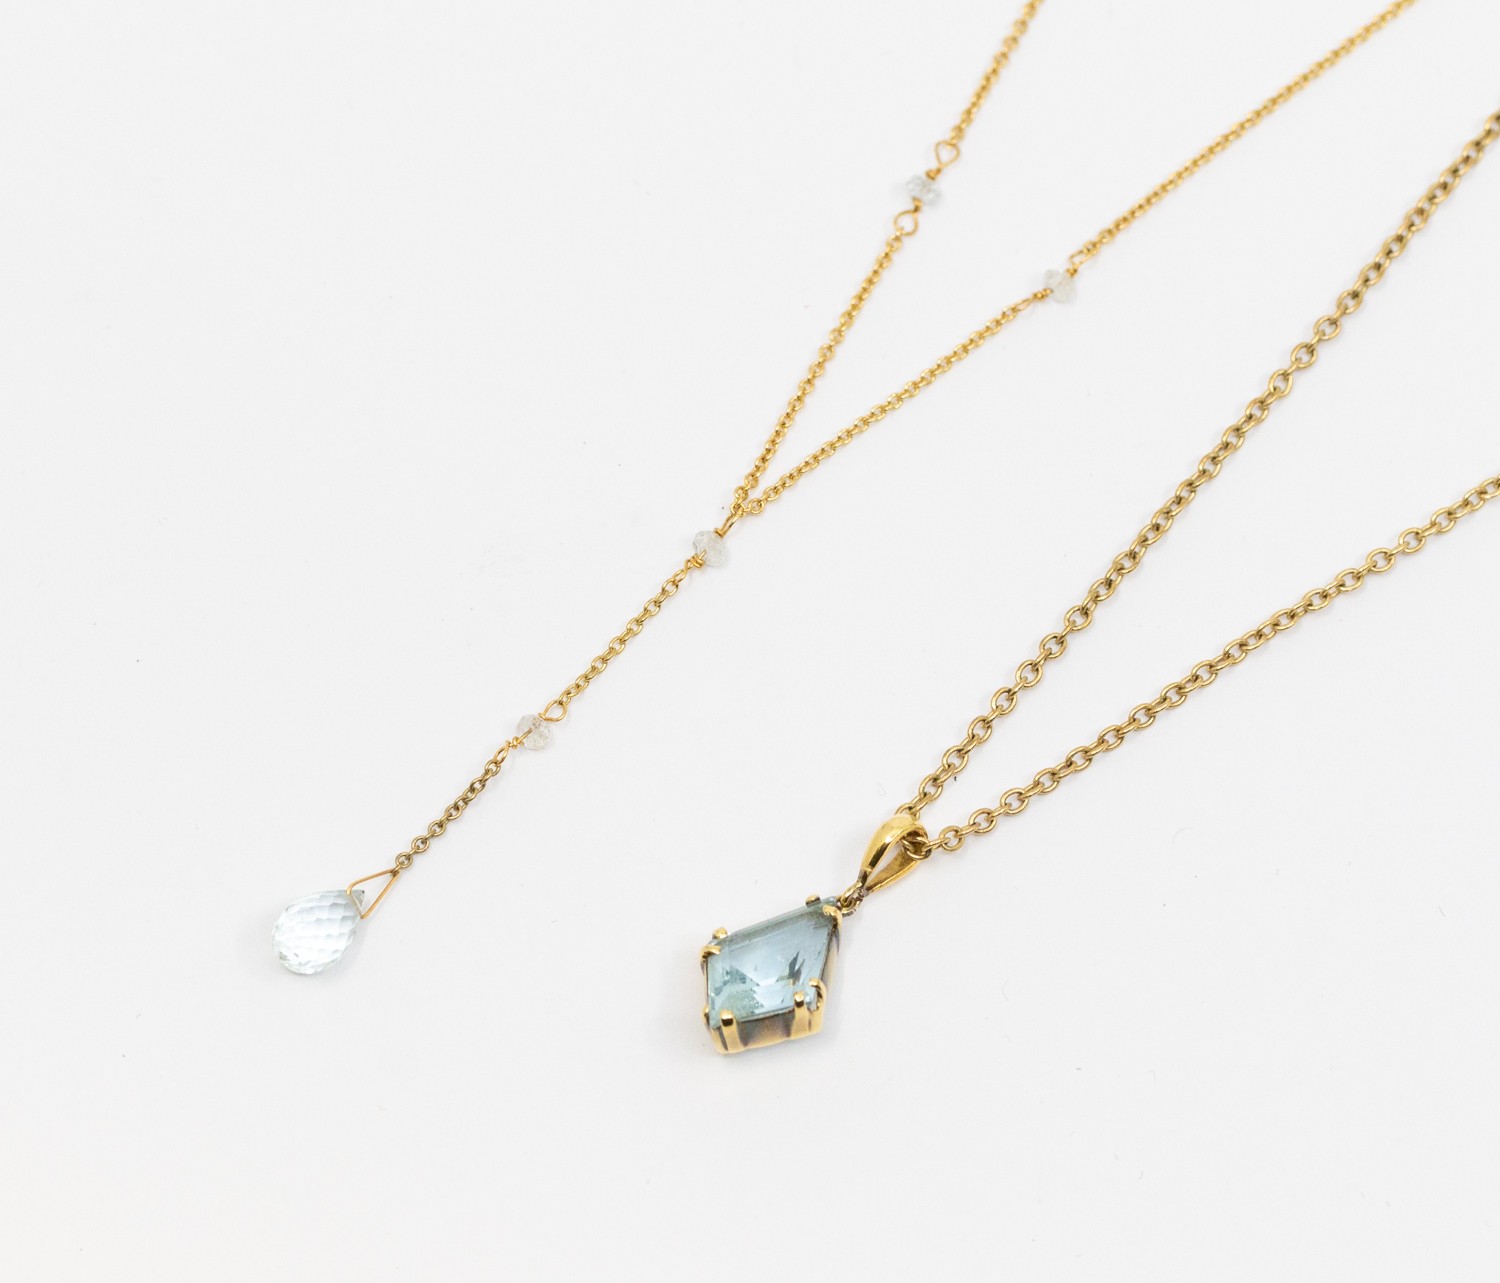 An aquamarine and 18ct gold drop necklace, comprising a fine gold chain set with two small